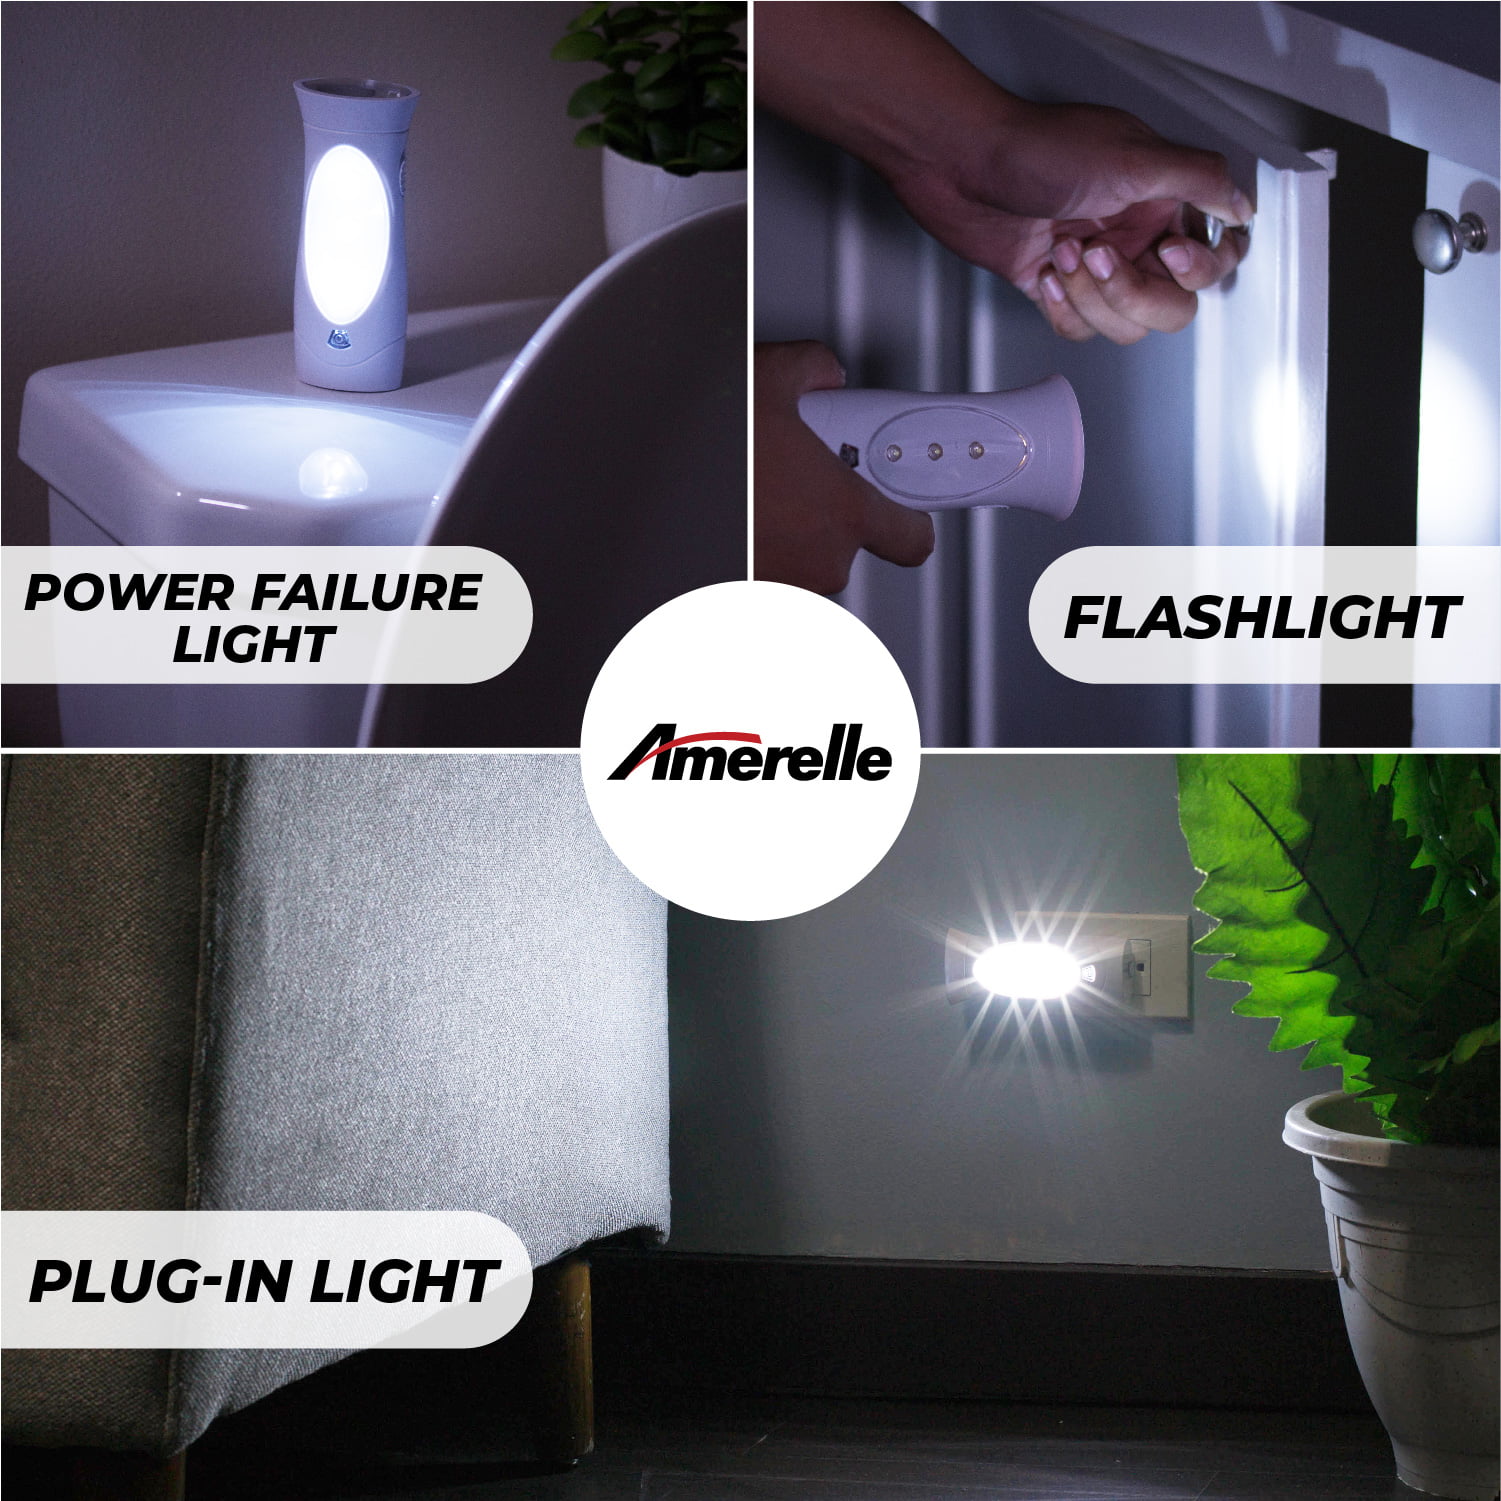 Amerelle LED Emergency Lights For Home Power Failure, 2 Pack – Triple  Function Power Failure Light and Plug In Flashlight Combo, With  Rechargeable